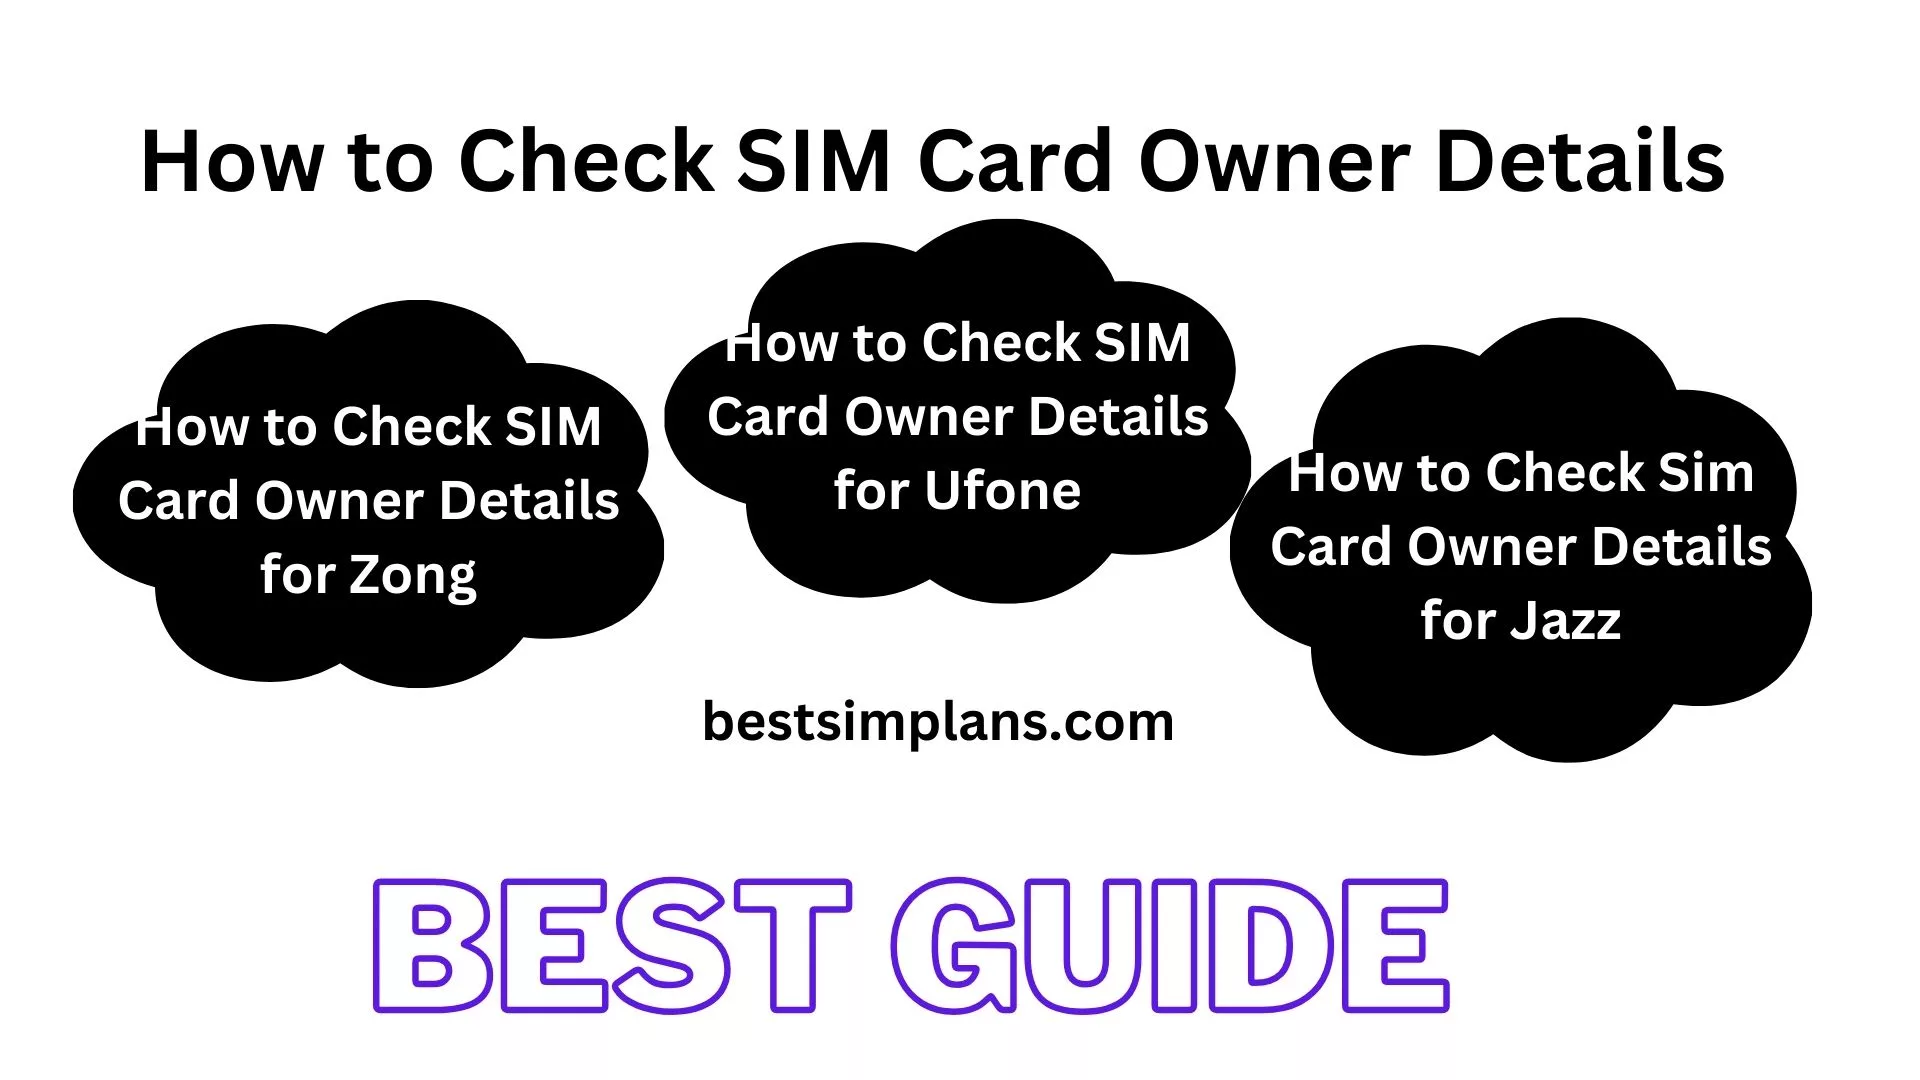 How to Check SIM Card Owner Details for Zong Ufone Jazz and Telenor